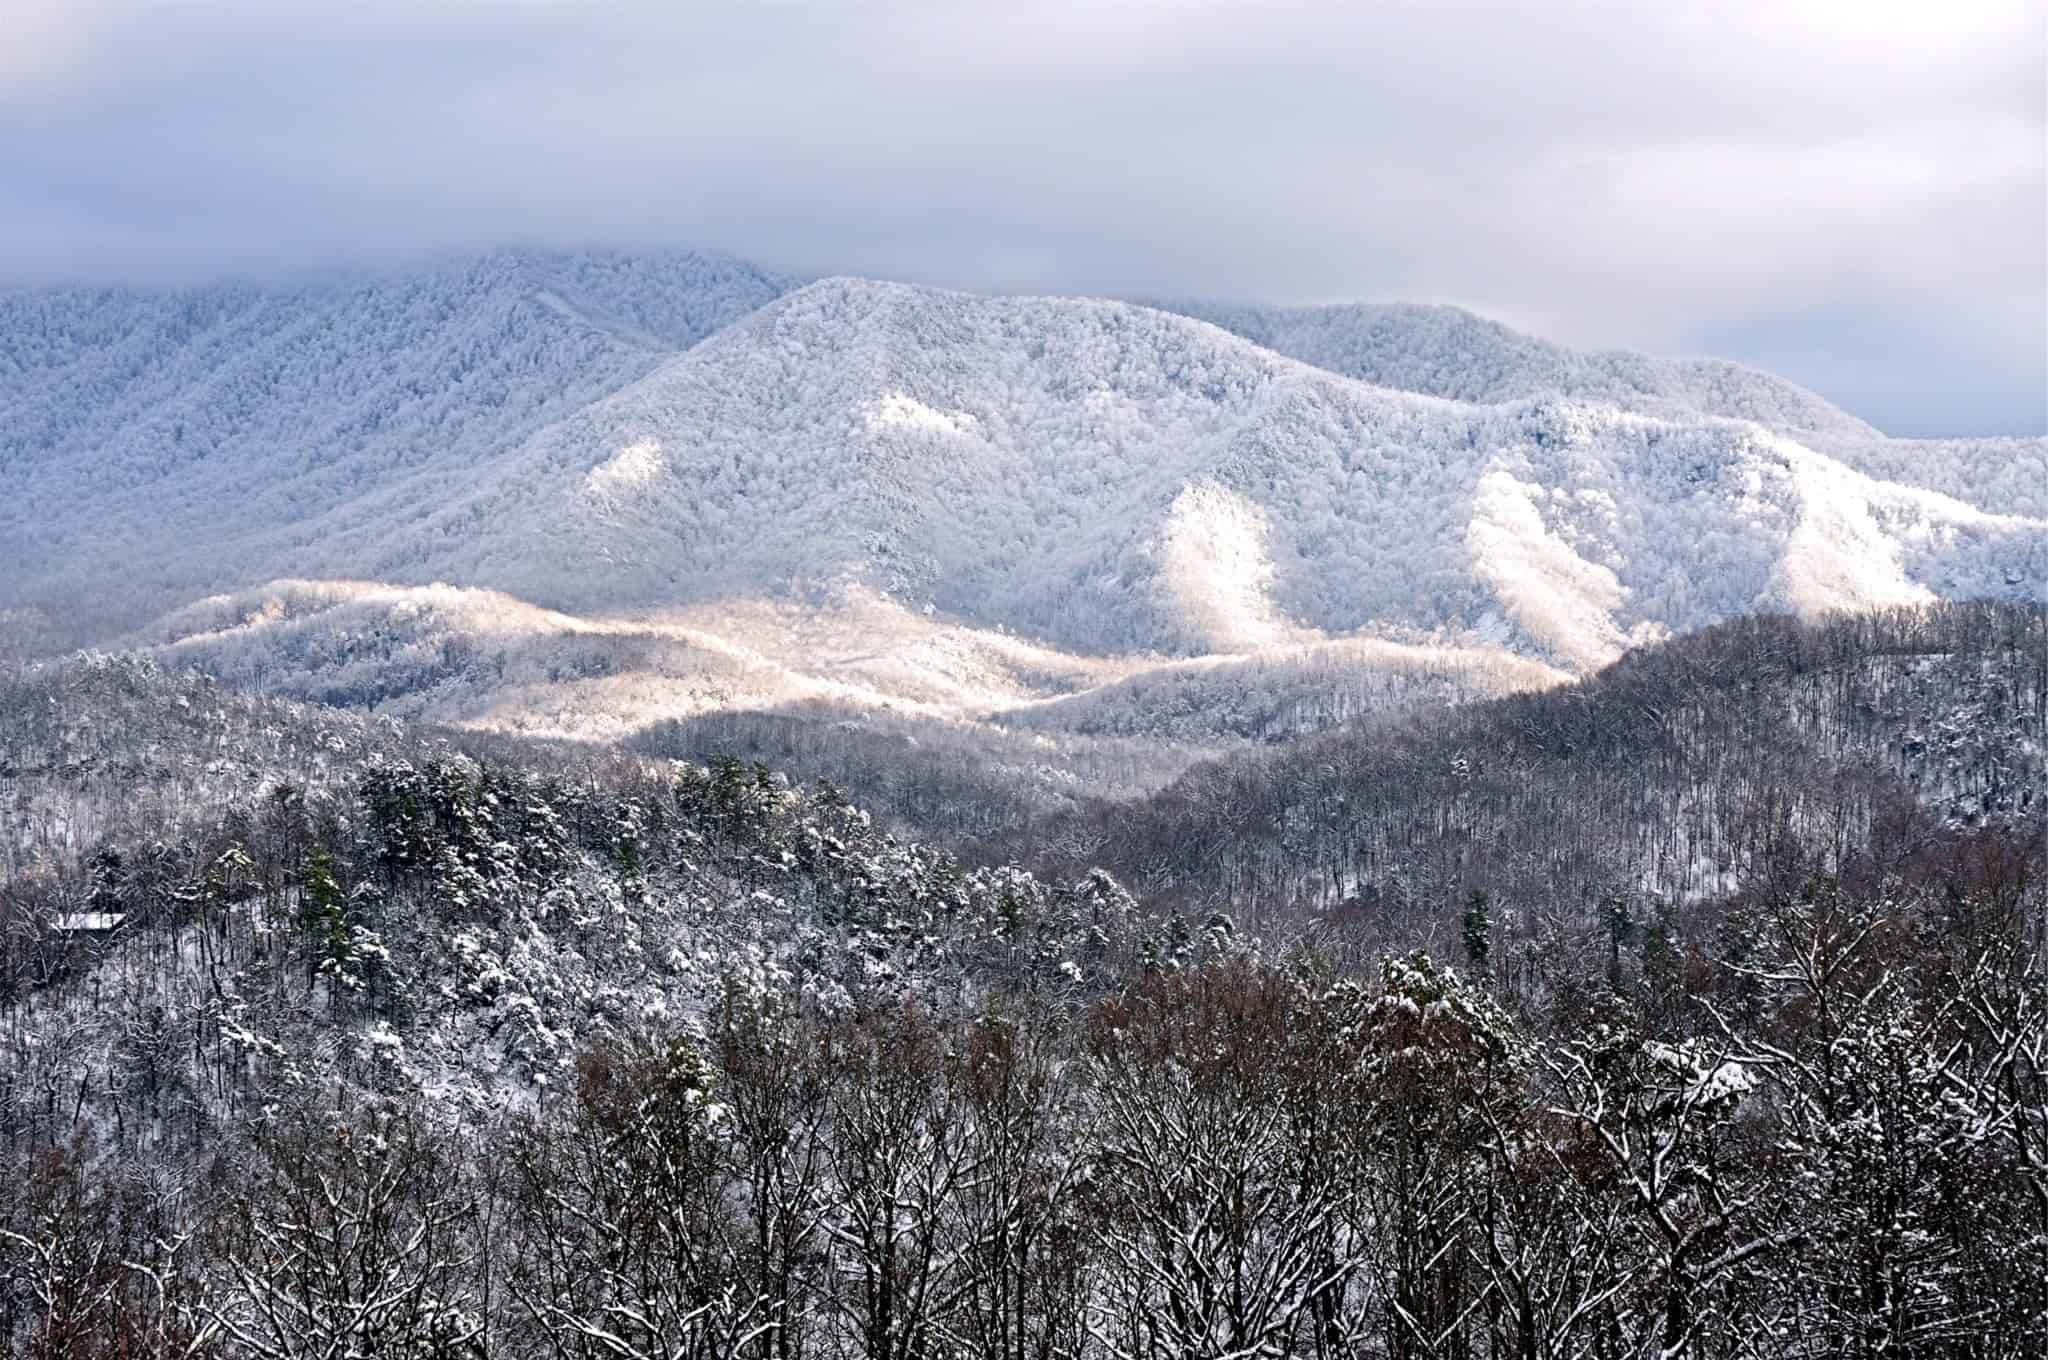 Winter hiking in the Smokies is one of the best activities to enjoy